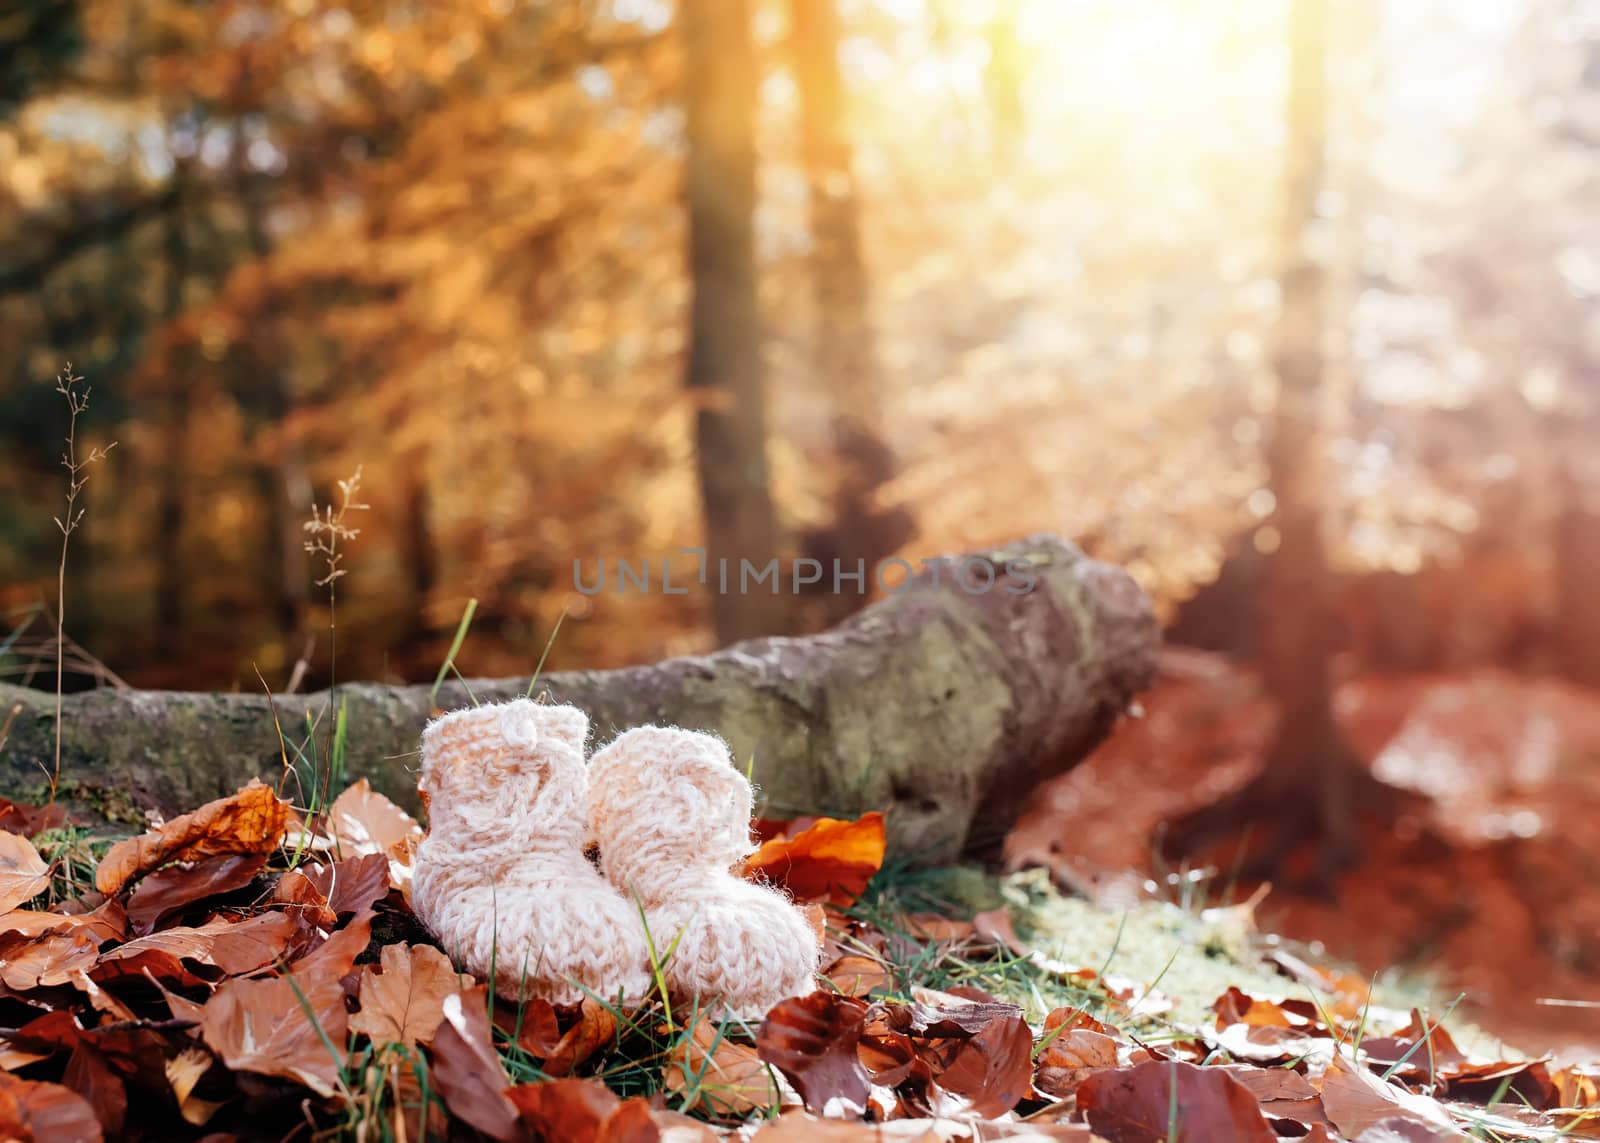 Knitted booties on a pile of leaves in the autumn forest